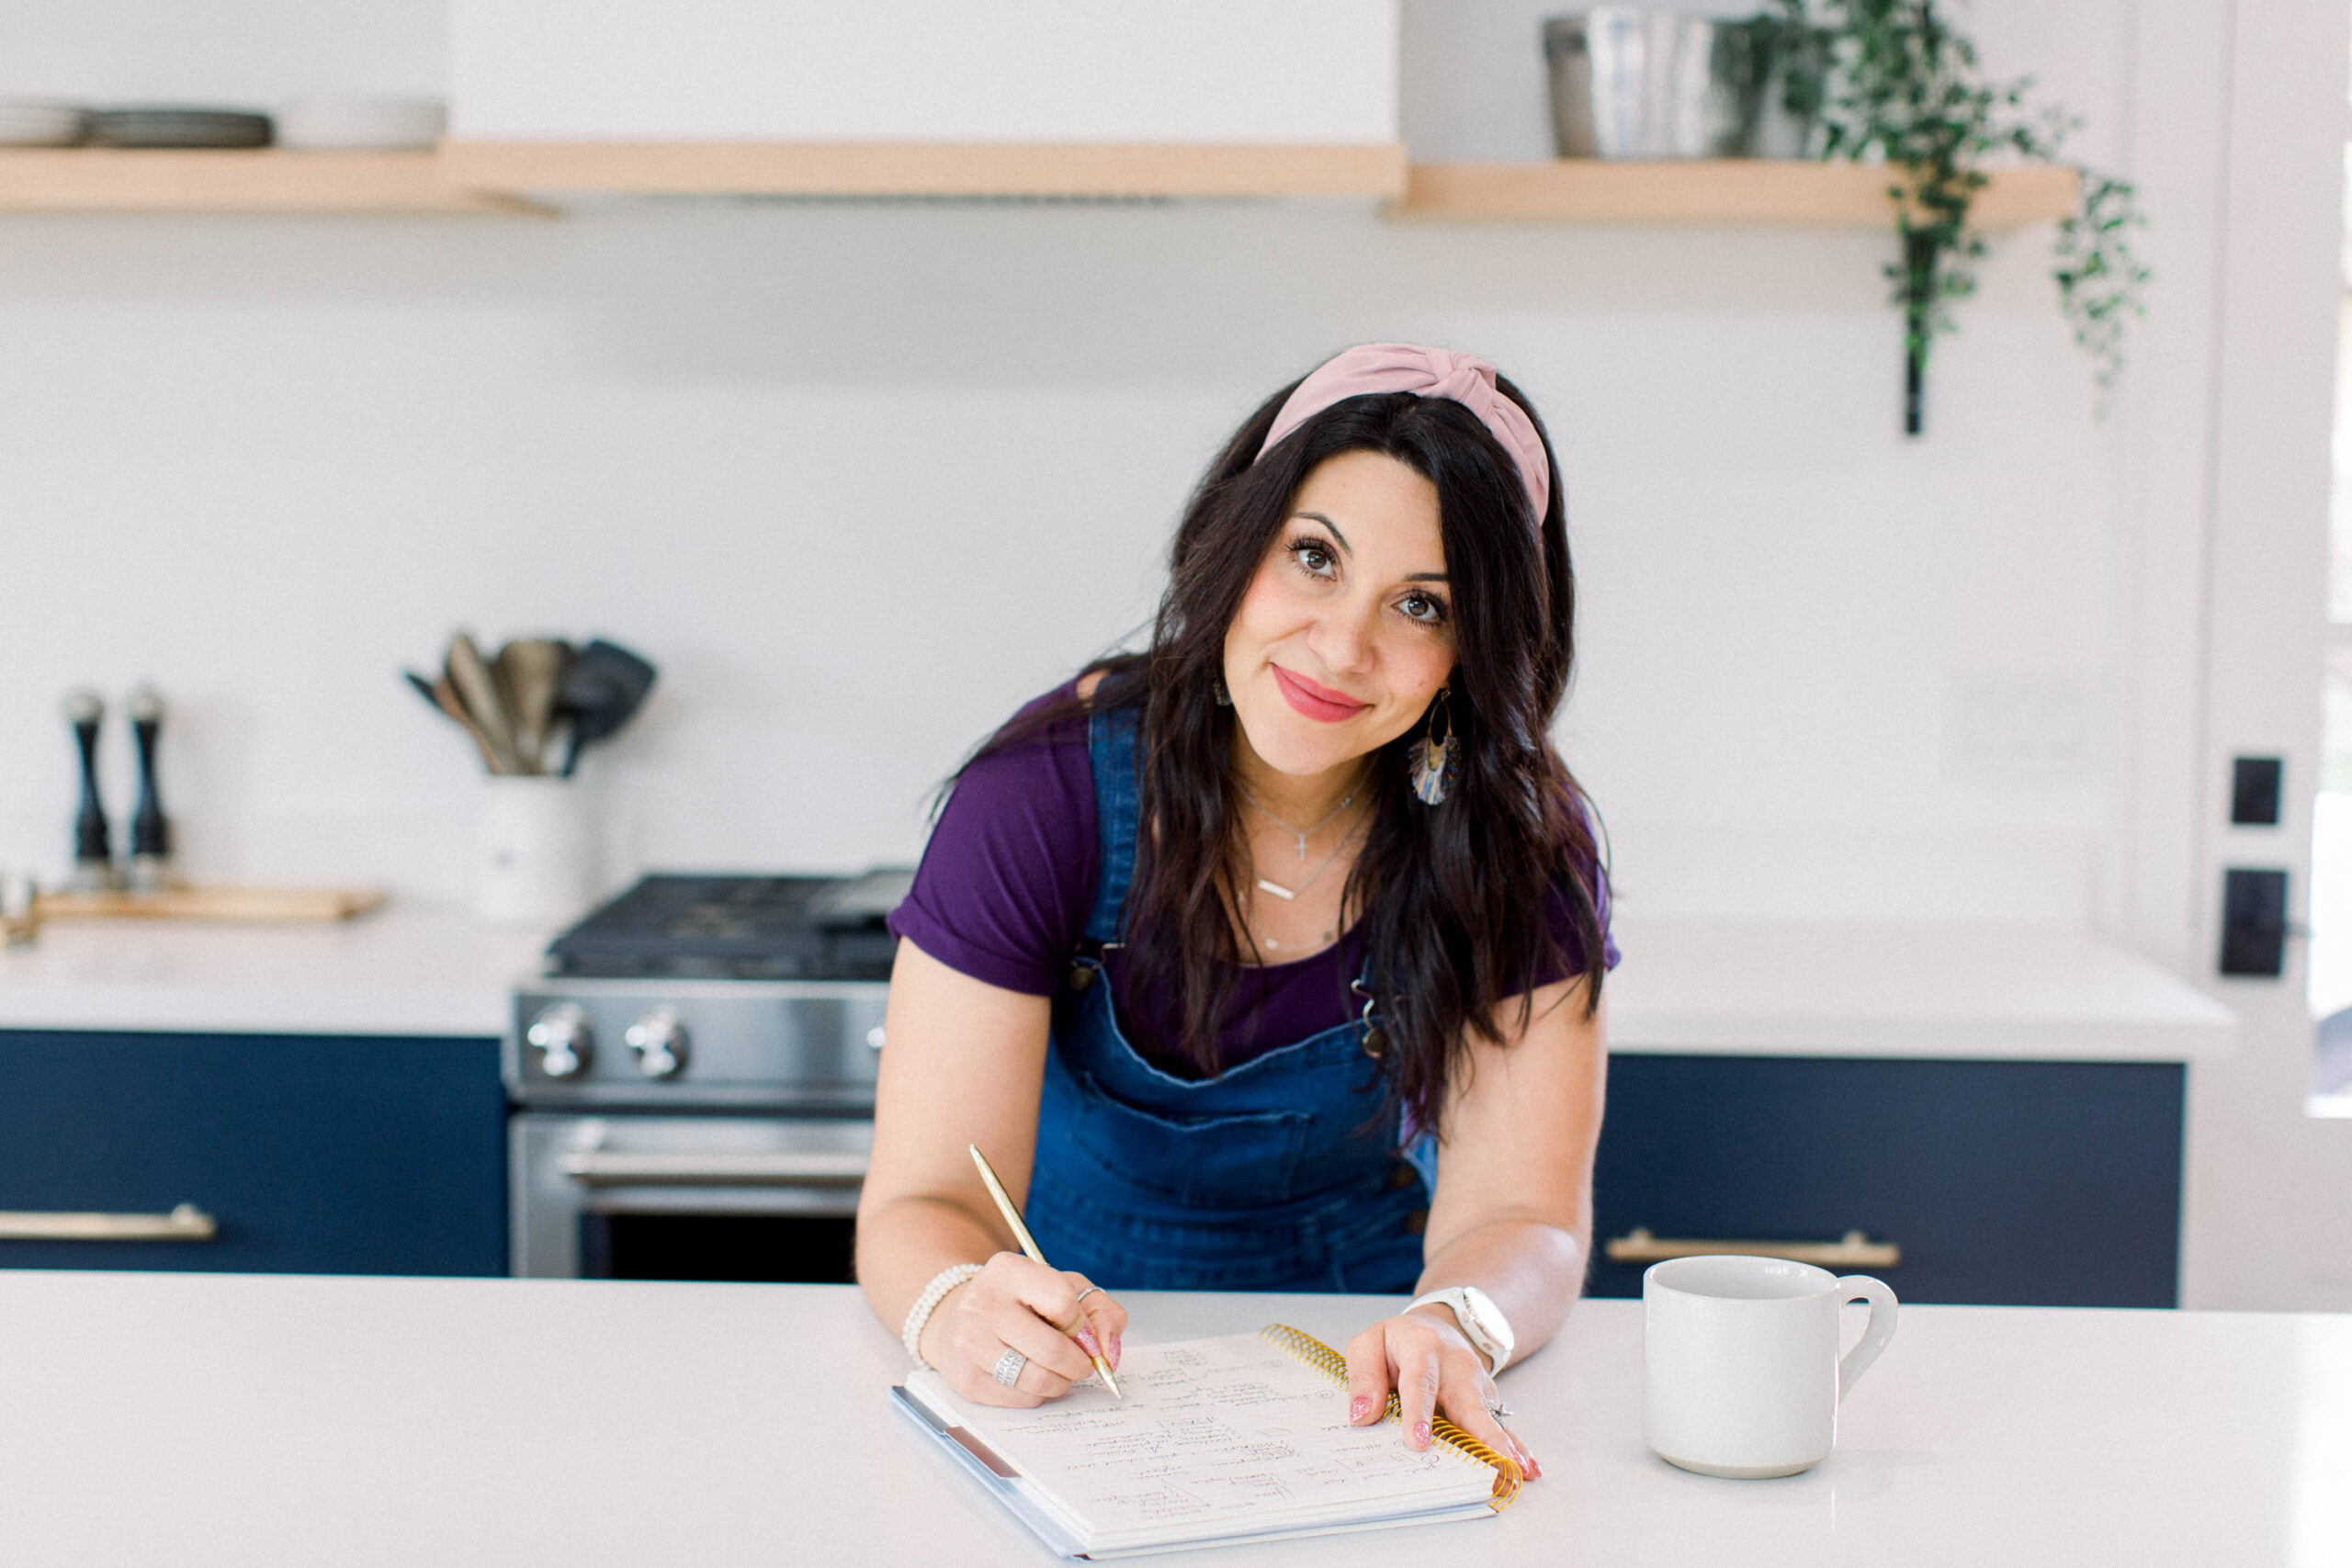 dark haired woman leaning on a kitchen counter with a notebook, writing a list. She is wearing a pink headband, purple blouse, and denim overals. She is smiling at the camera and there's a white coffee mug next to her left hand.